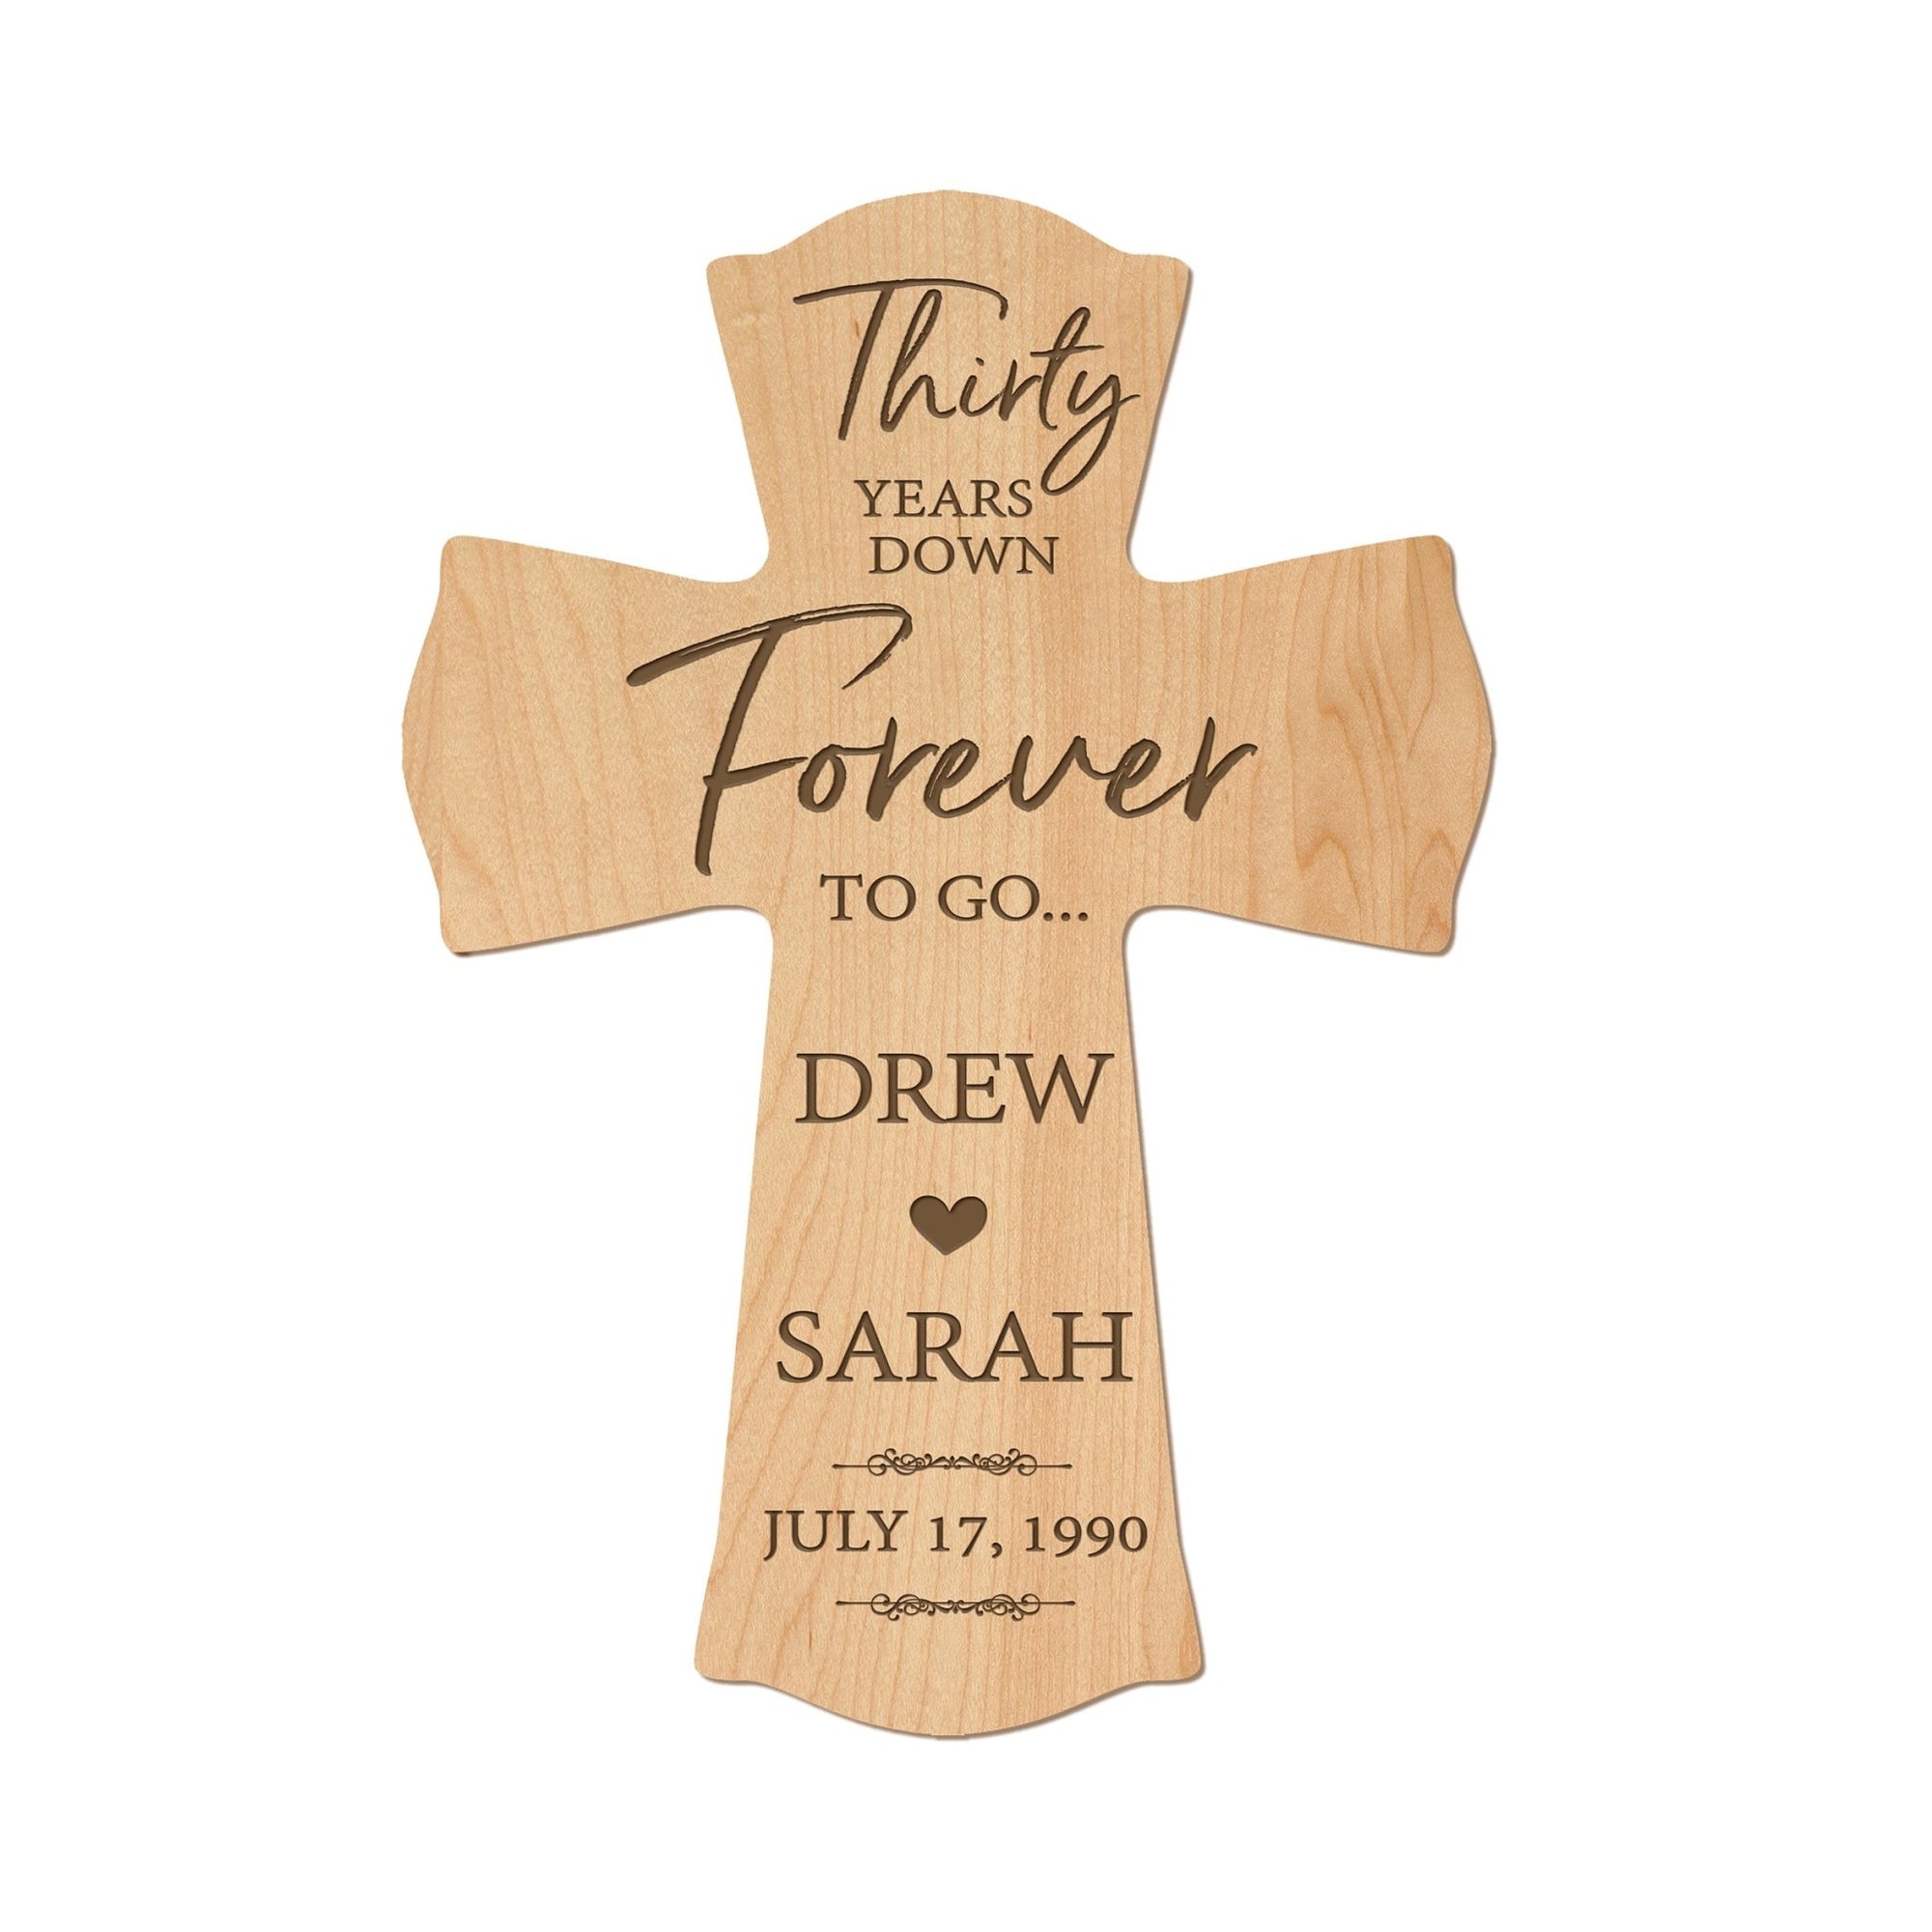 Thoughtful Gifts for Couples – Personalized 30th Wedding Anniversary Wall Cross